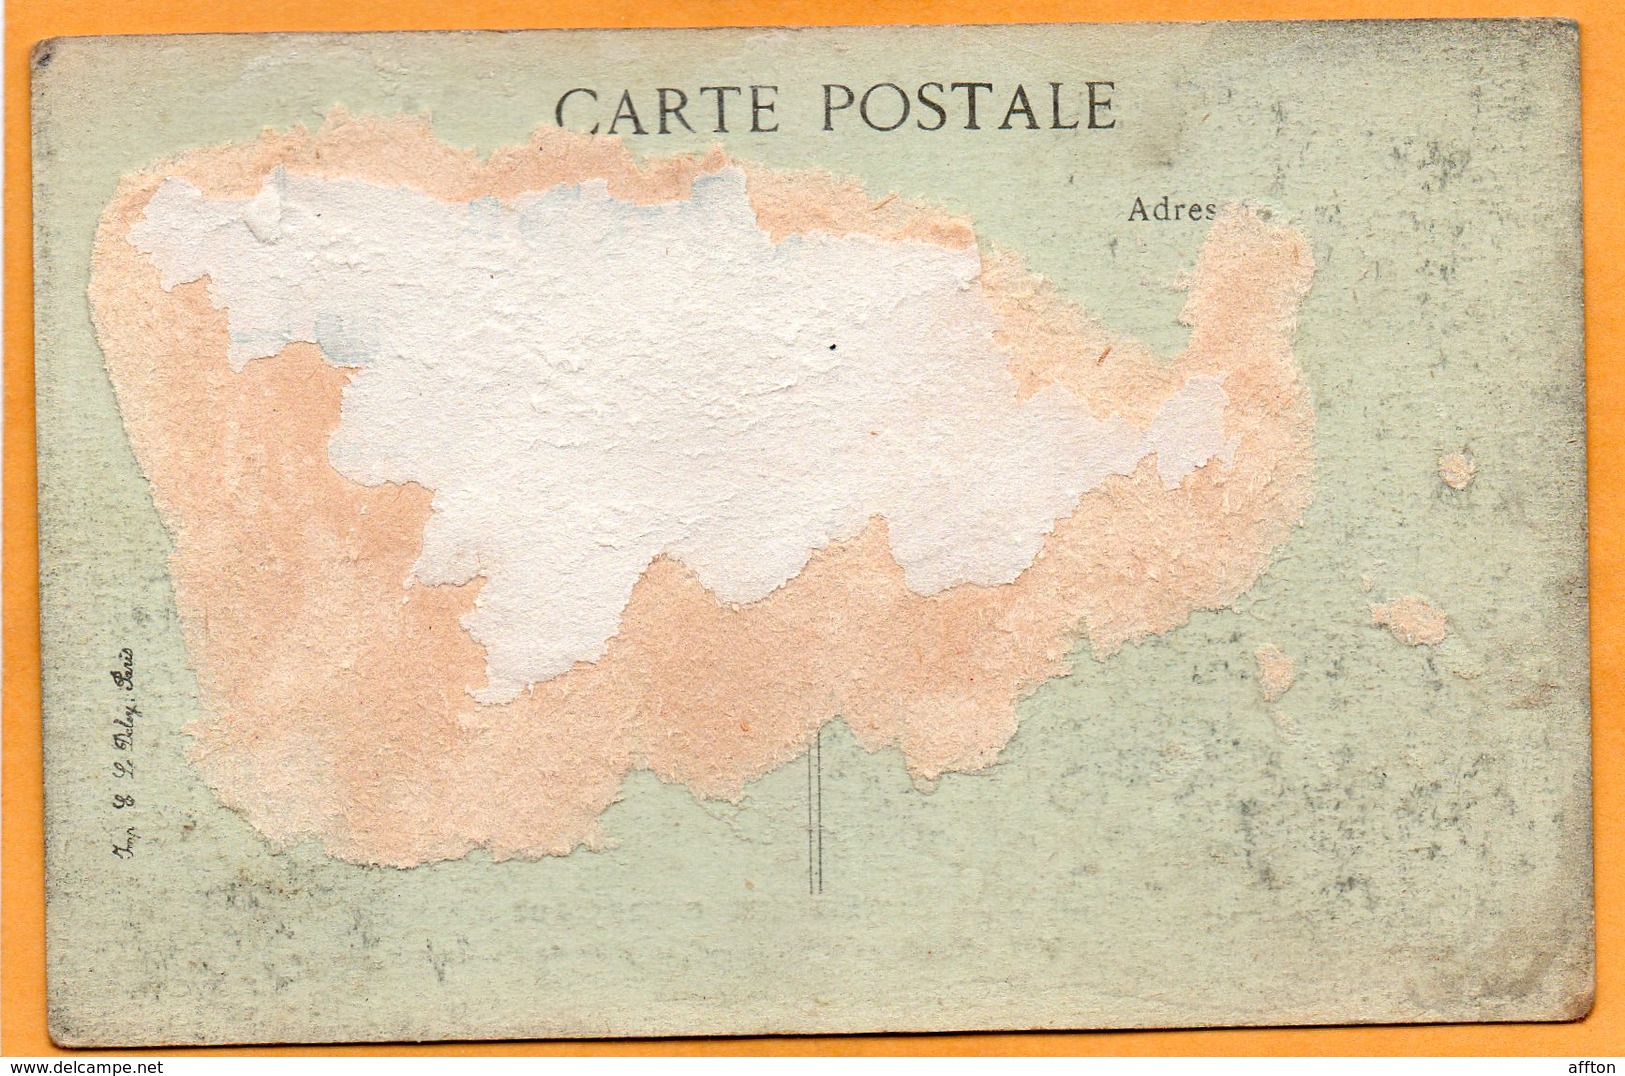 Veyre Mouton Monton France 1910 Postcard Was Glued To An Album Page And Removed - Veyre Monton